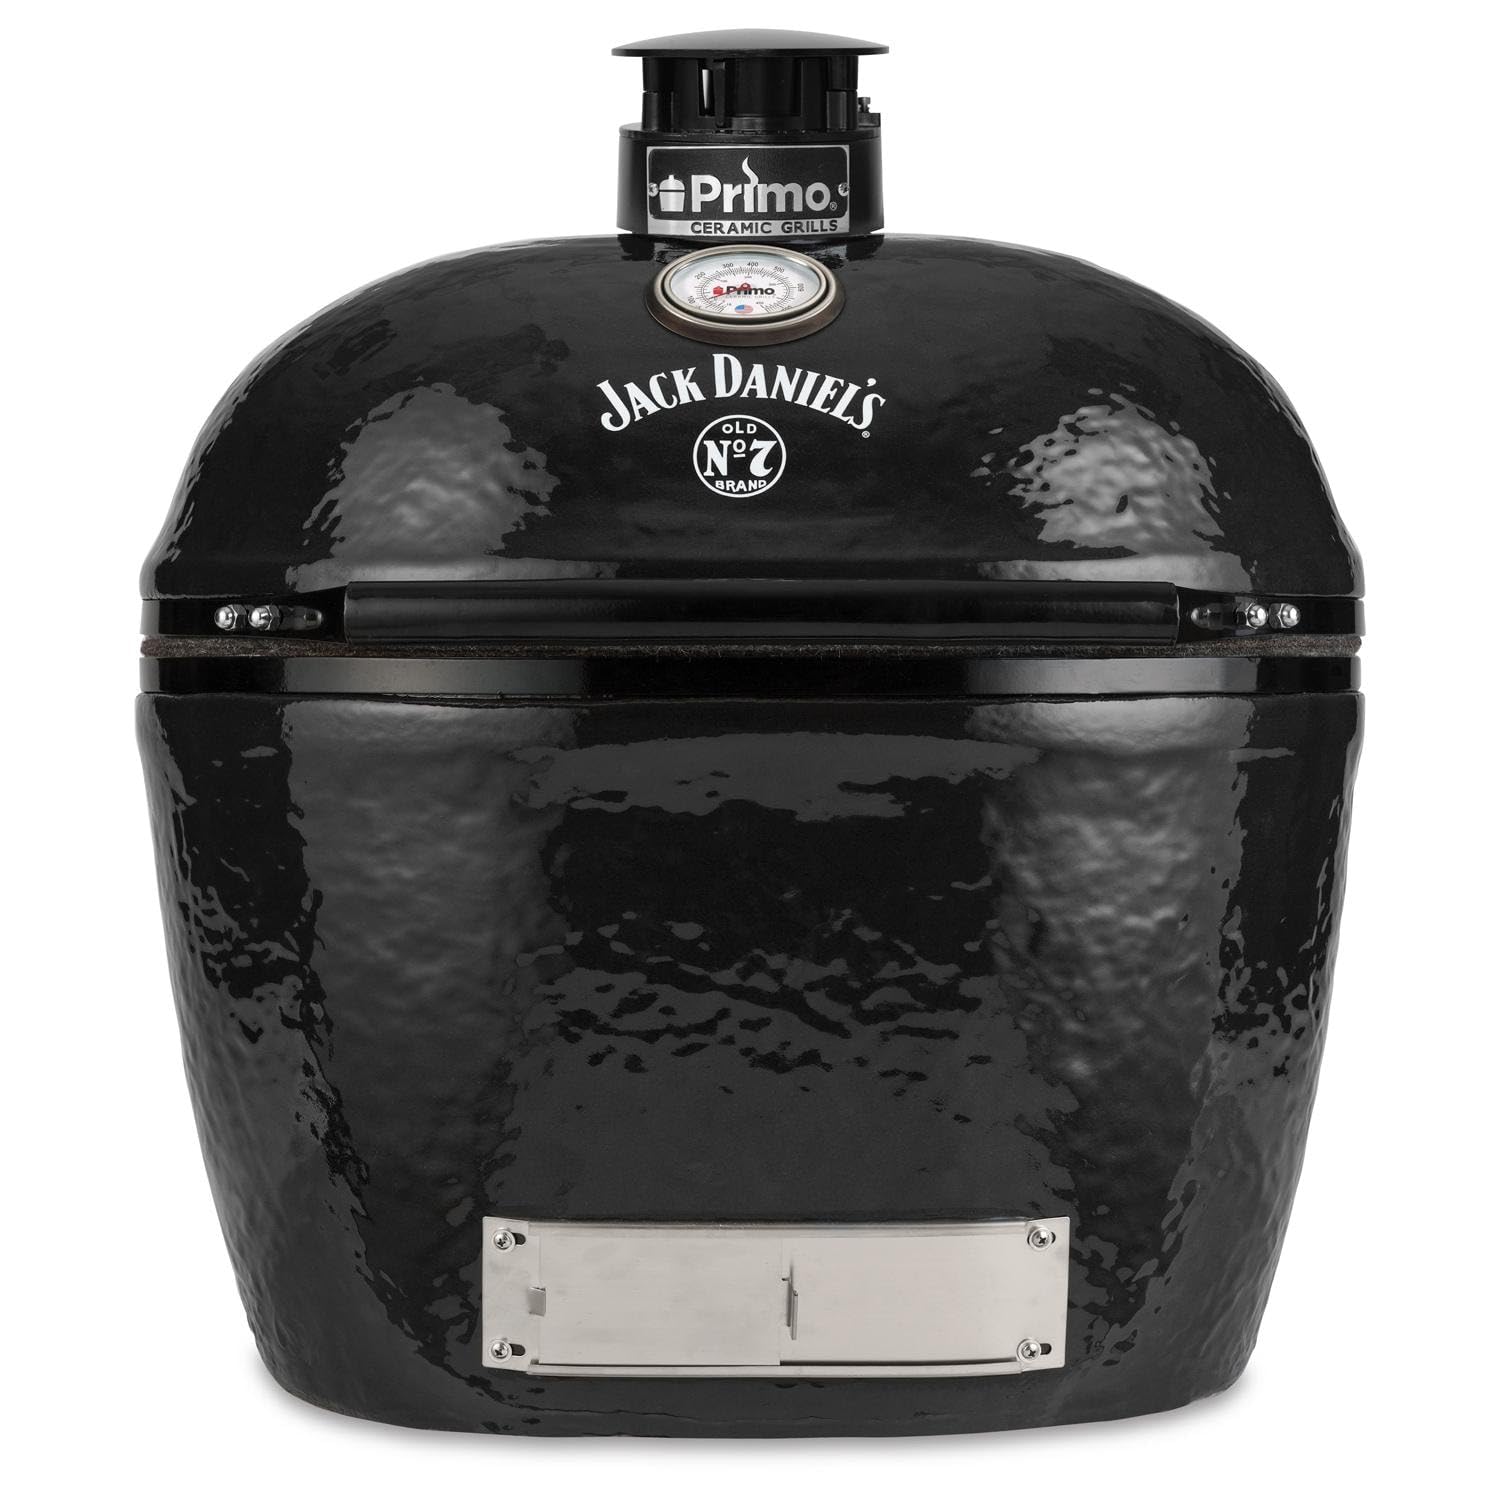 OVAL XLARGE CHARCOAL GRILL JACK DANIELS EDITION